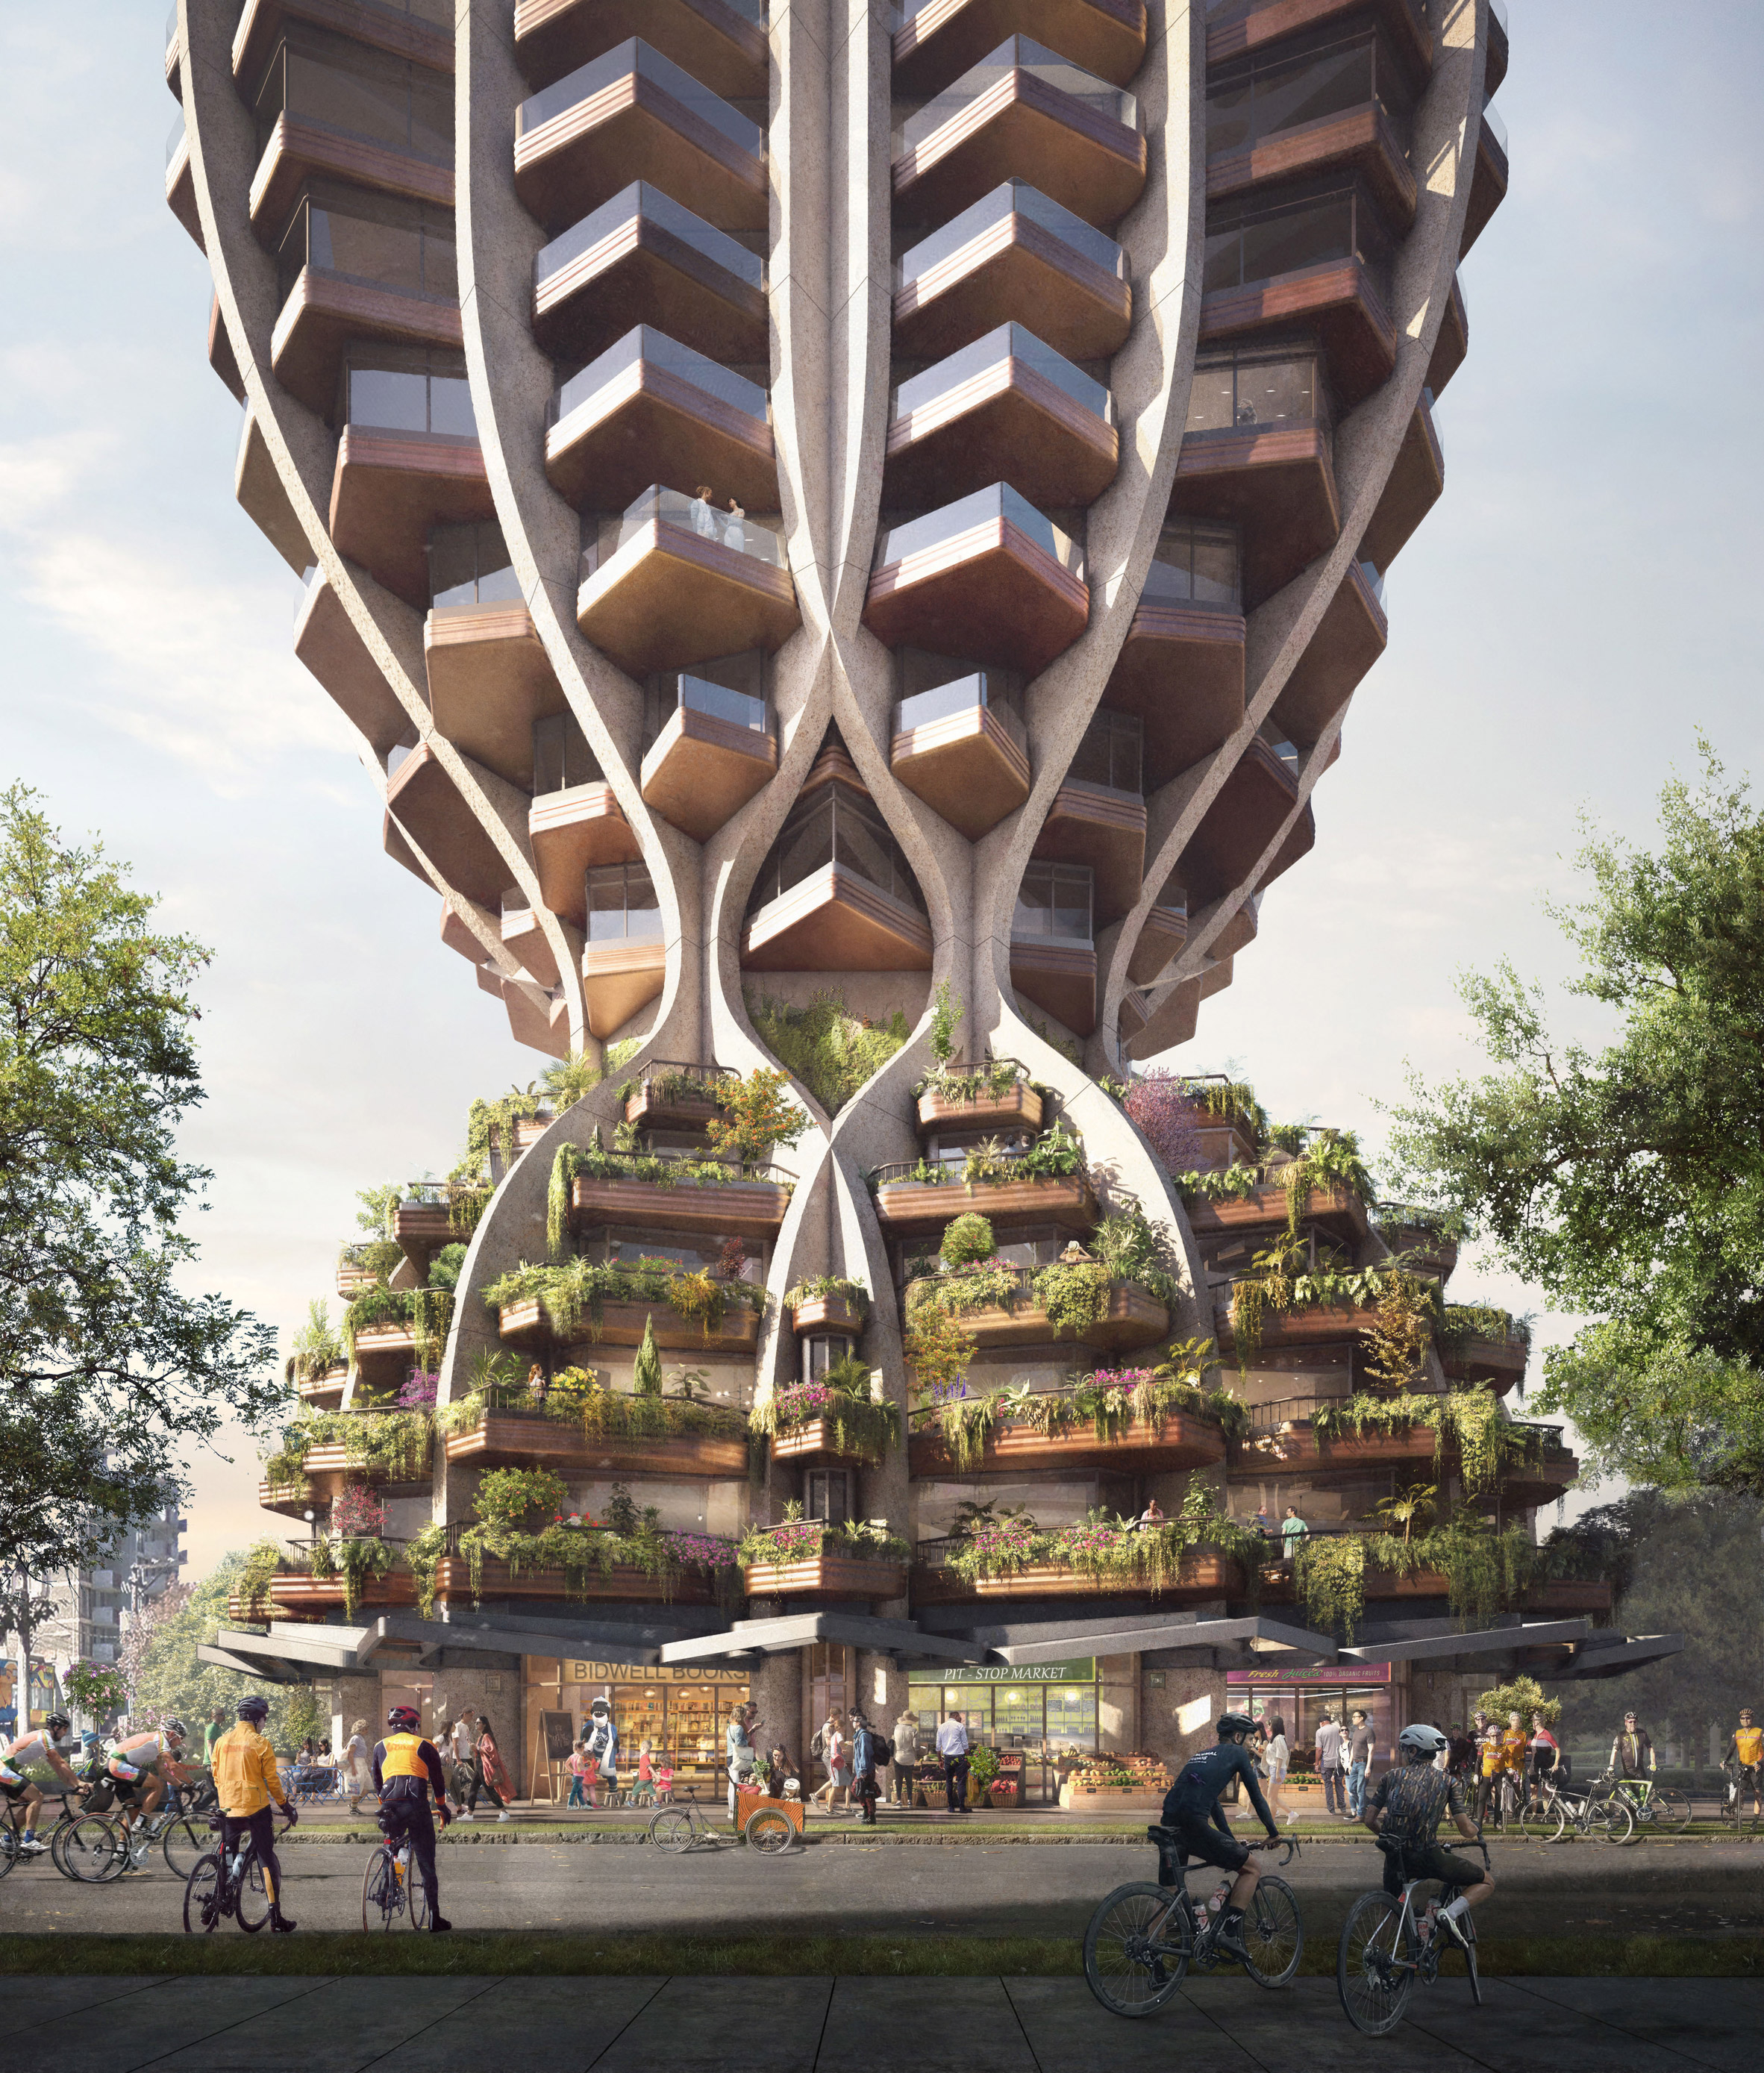 British architecture and design firm Heatherwick Studio has unveiled visuals of a pair of residential skyscrapers planned for Vancouver, Canada. 2021